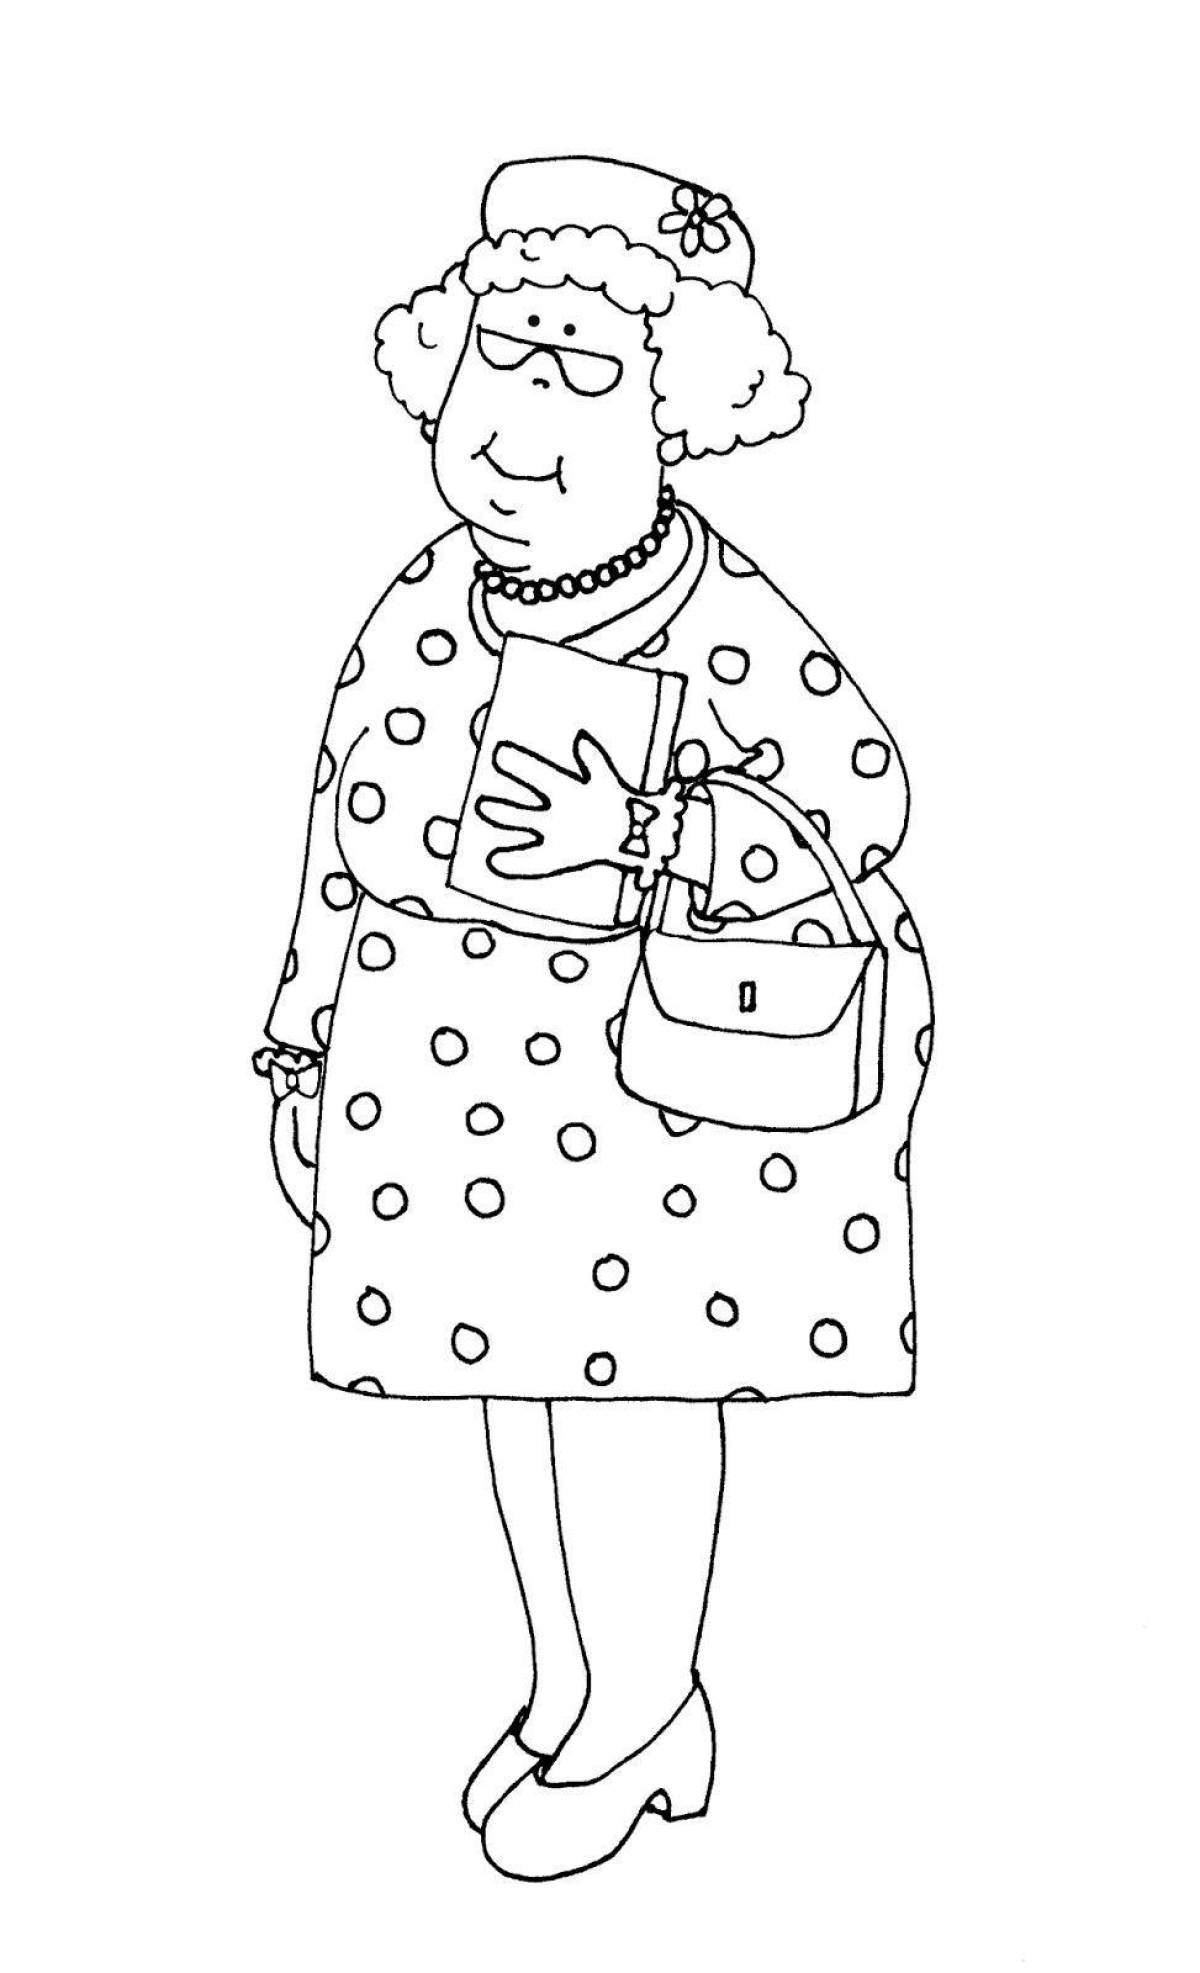 Caring grandmother coloring page